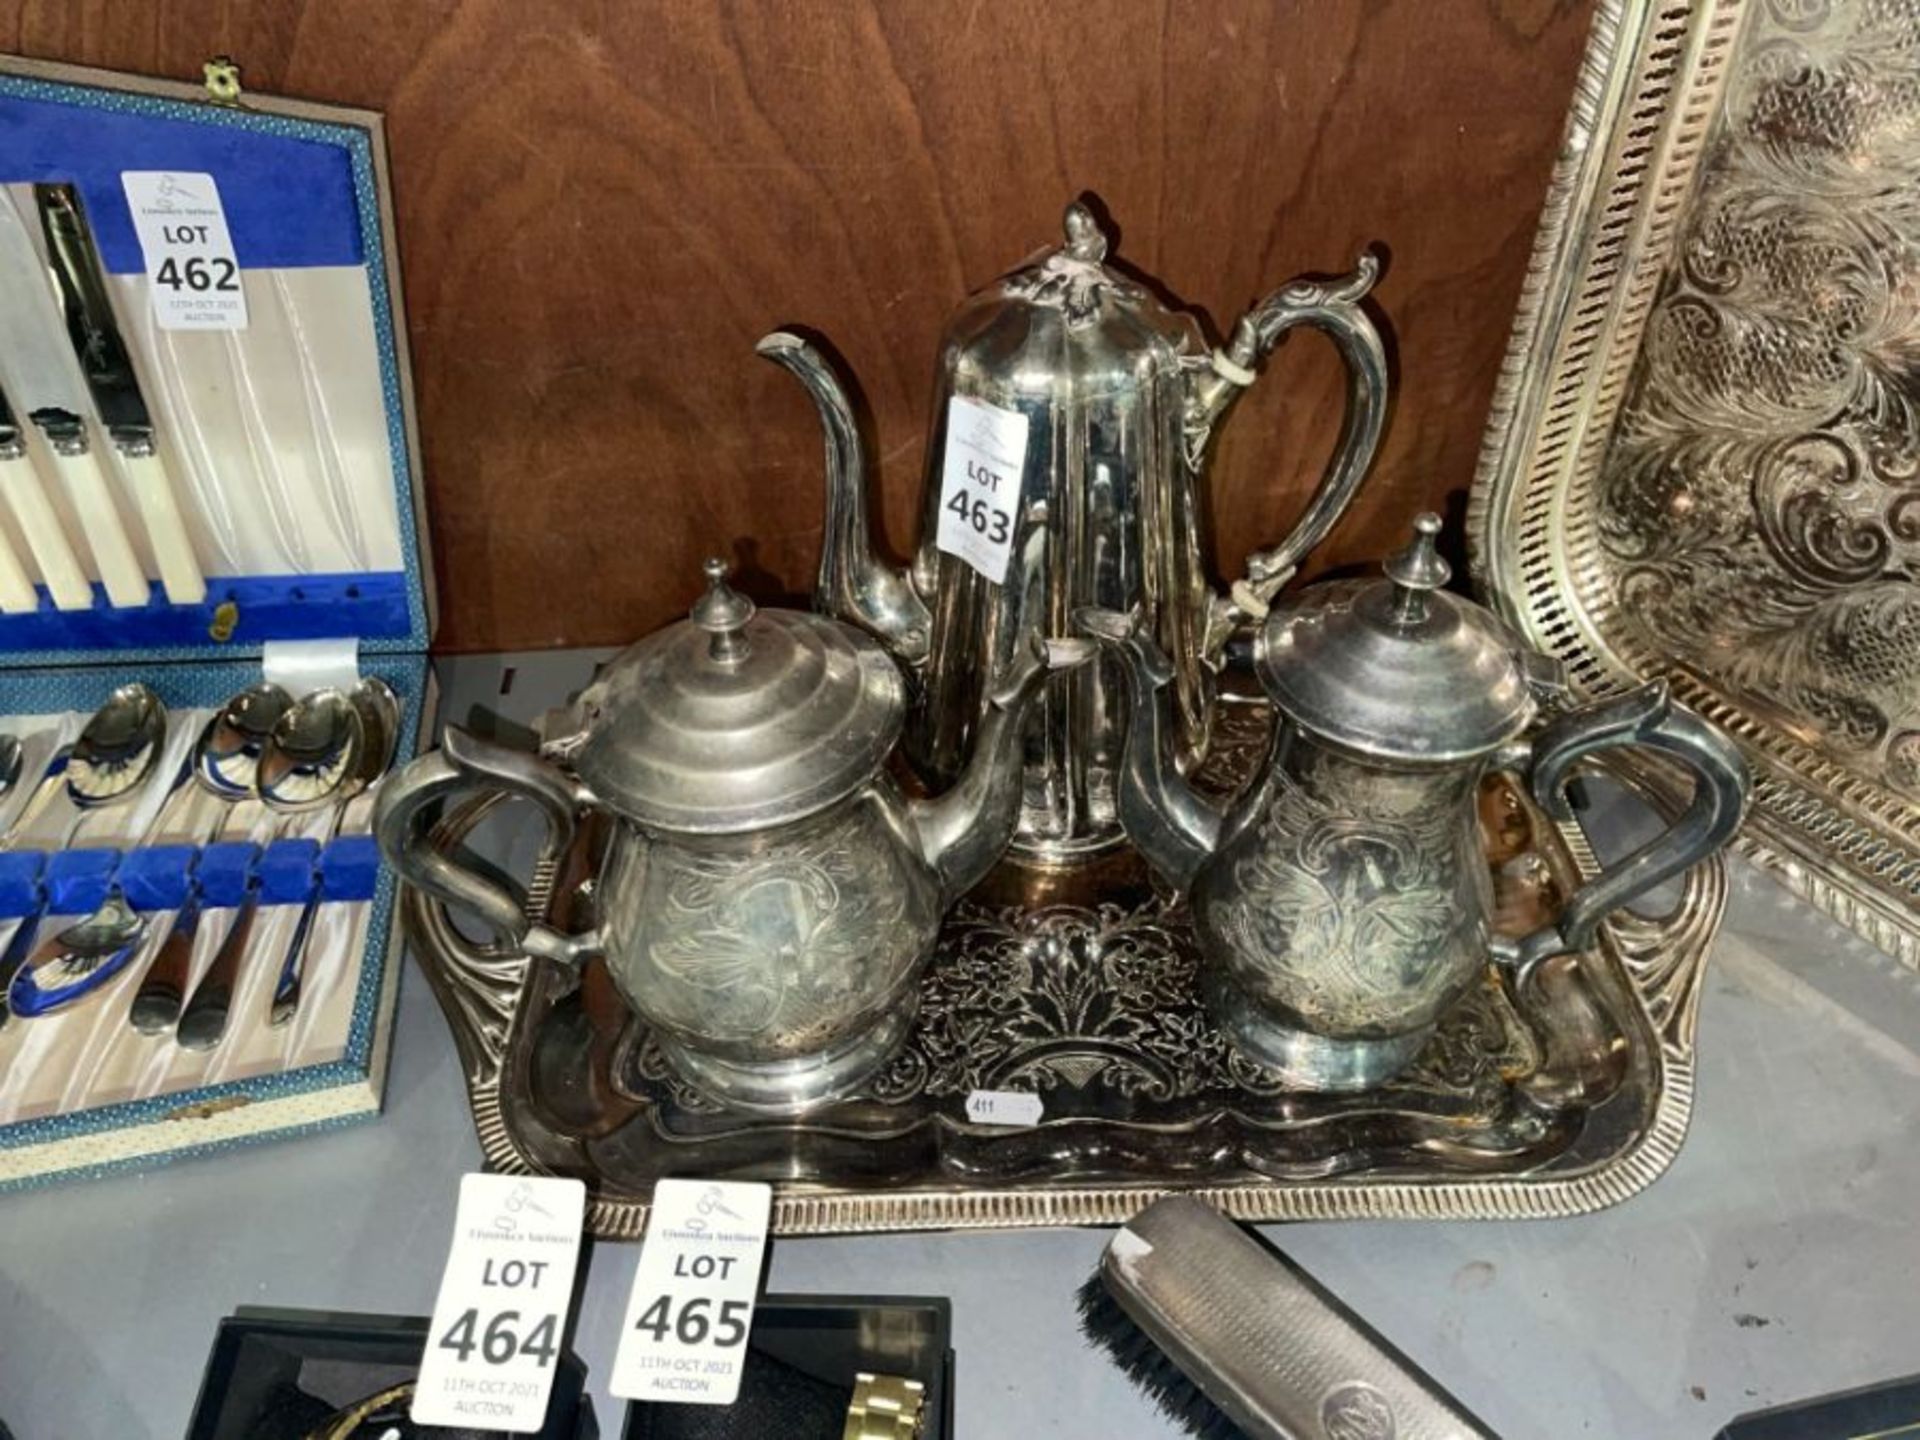 BUNDLE OF SILVER PLATED ITEMS ON TRAY